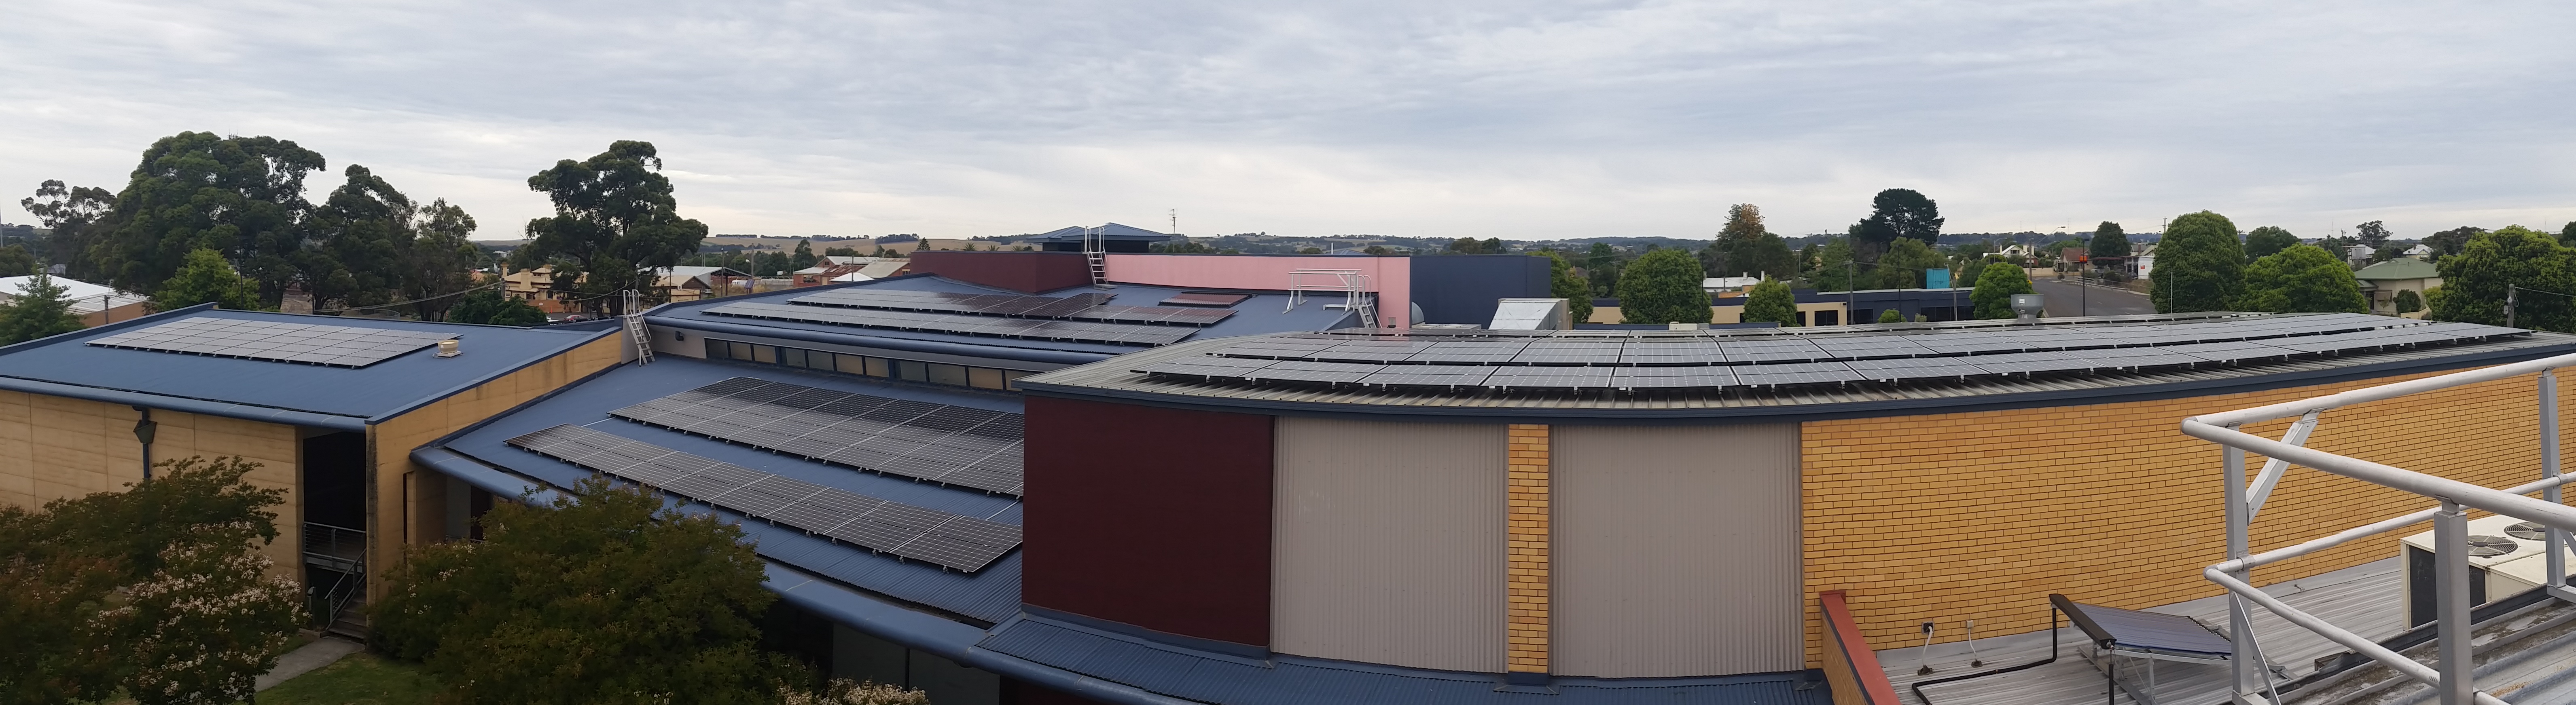 Rae St Solar PV Array - panoramic view